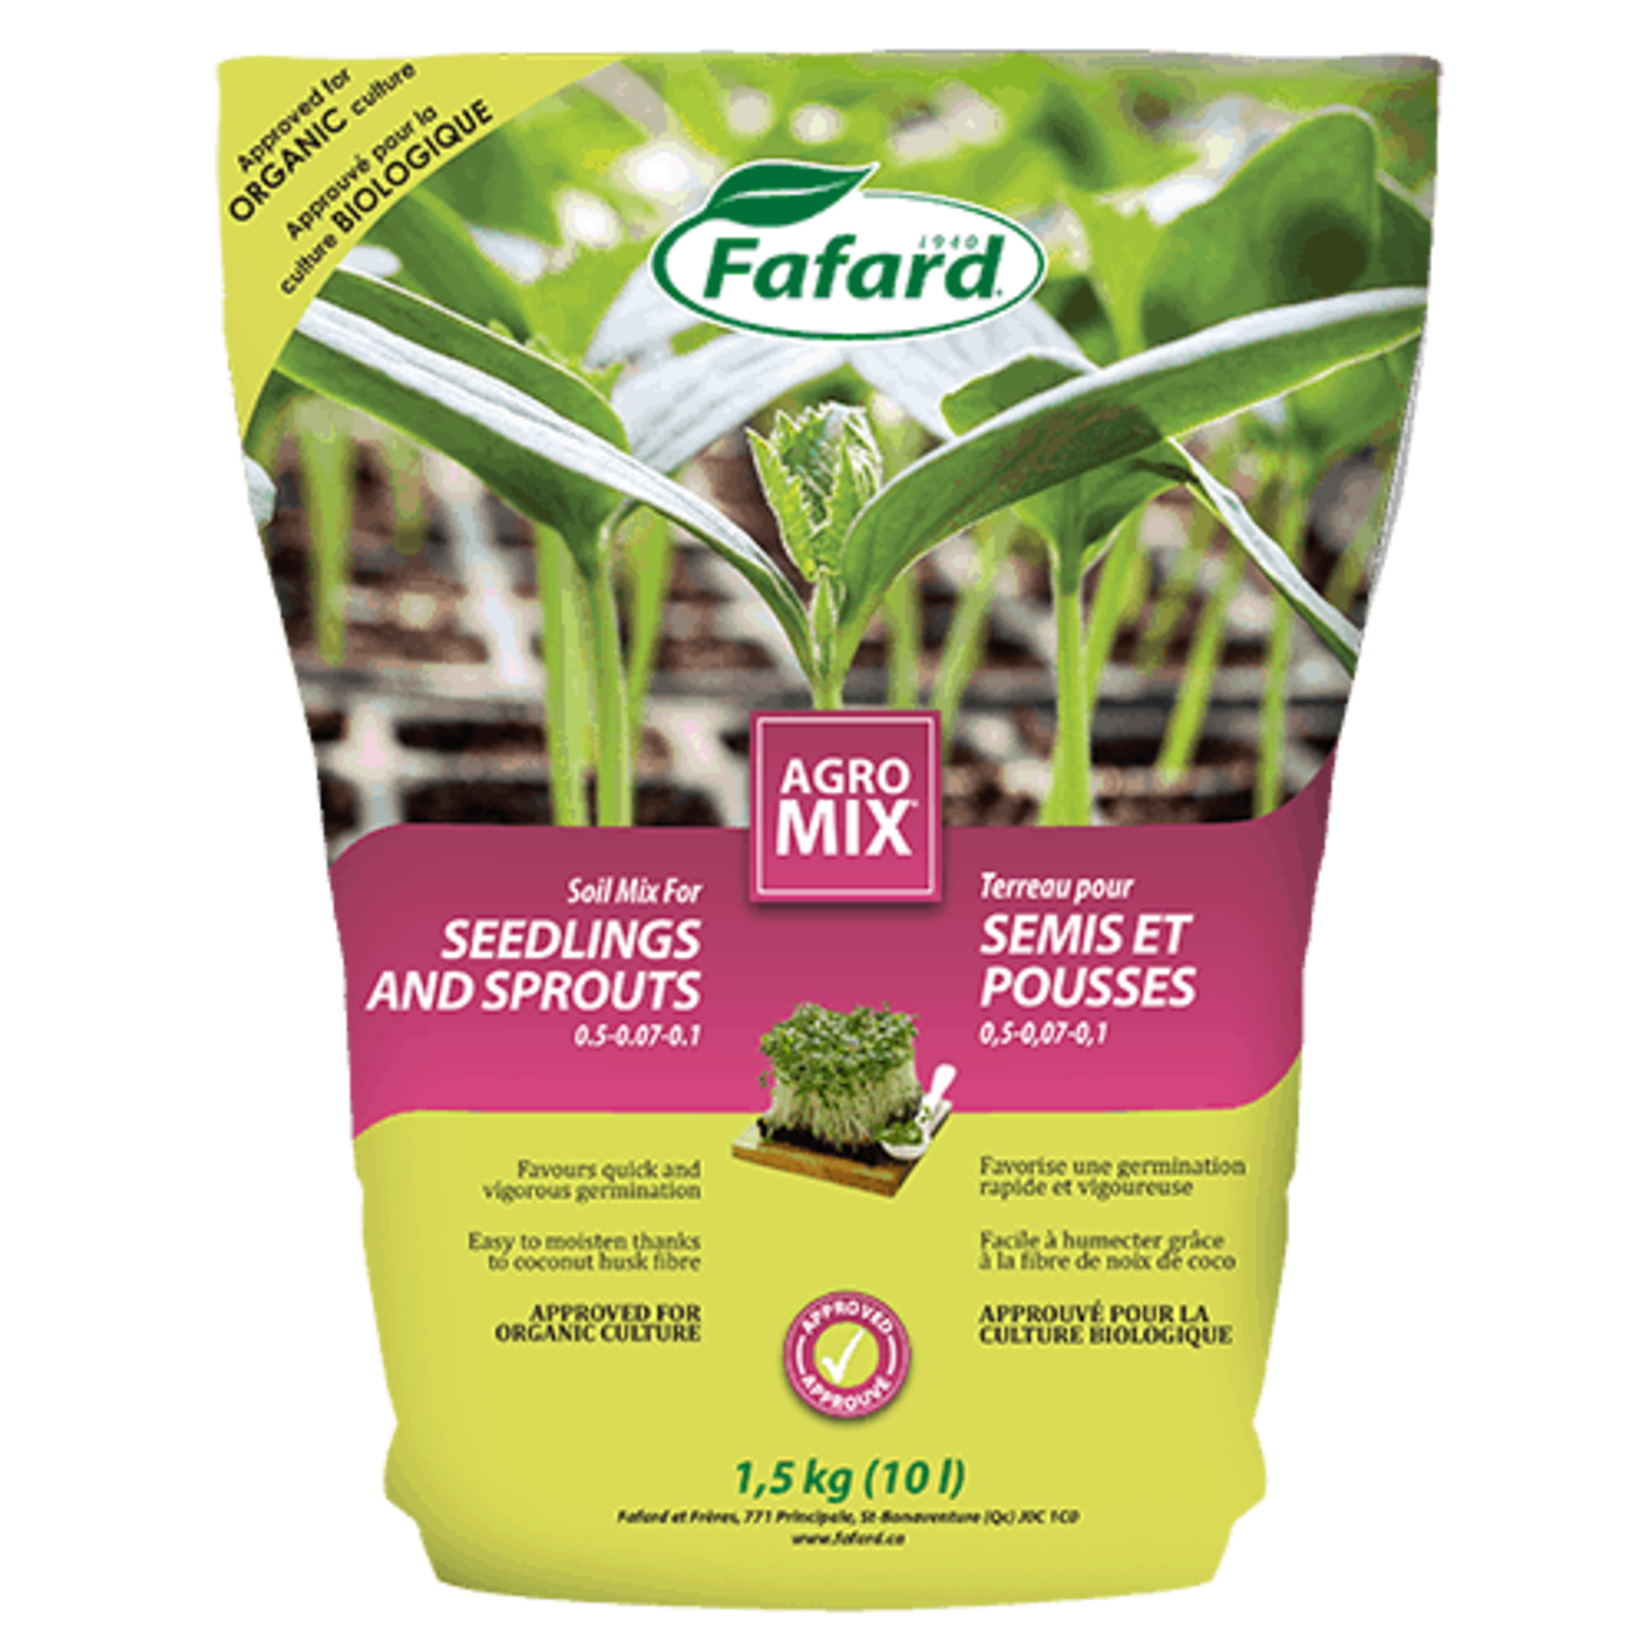 Fafard Agromix Seedling and Sprout Mix 10L